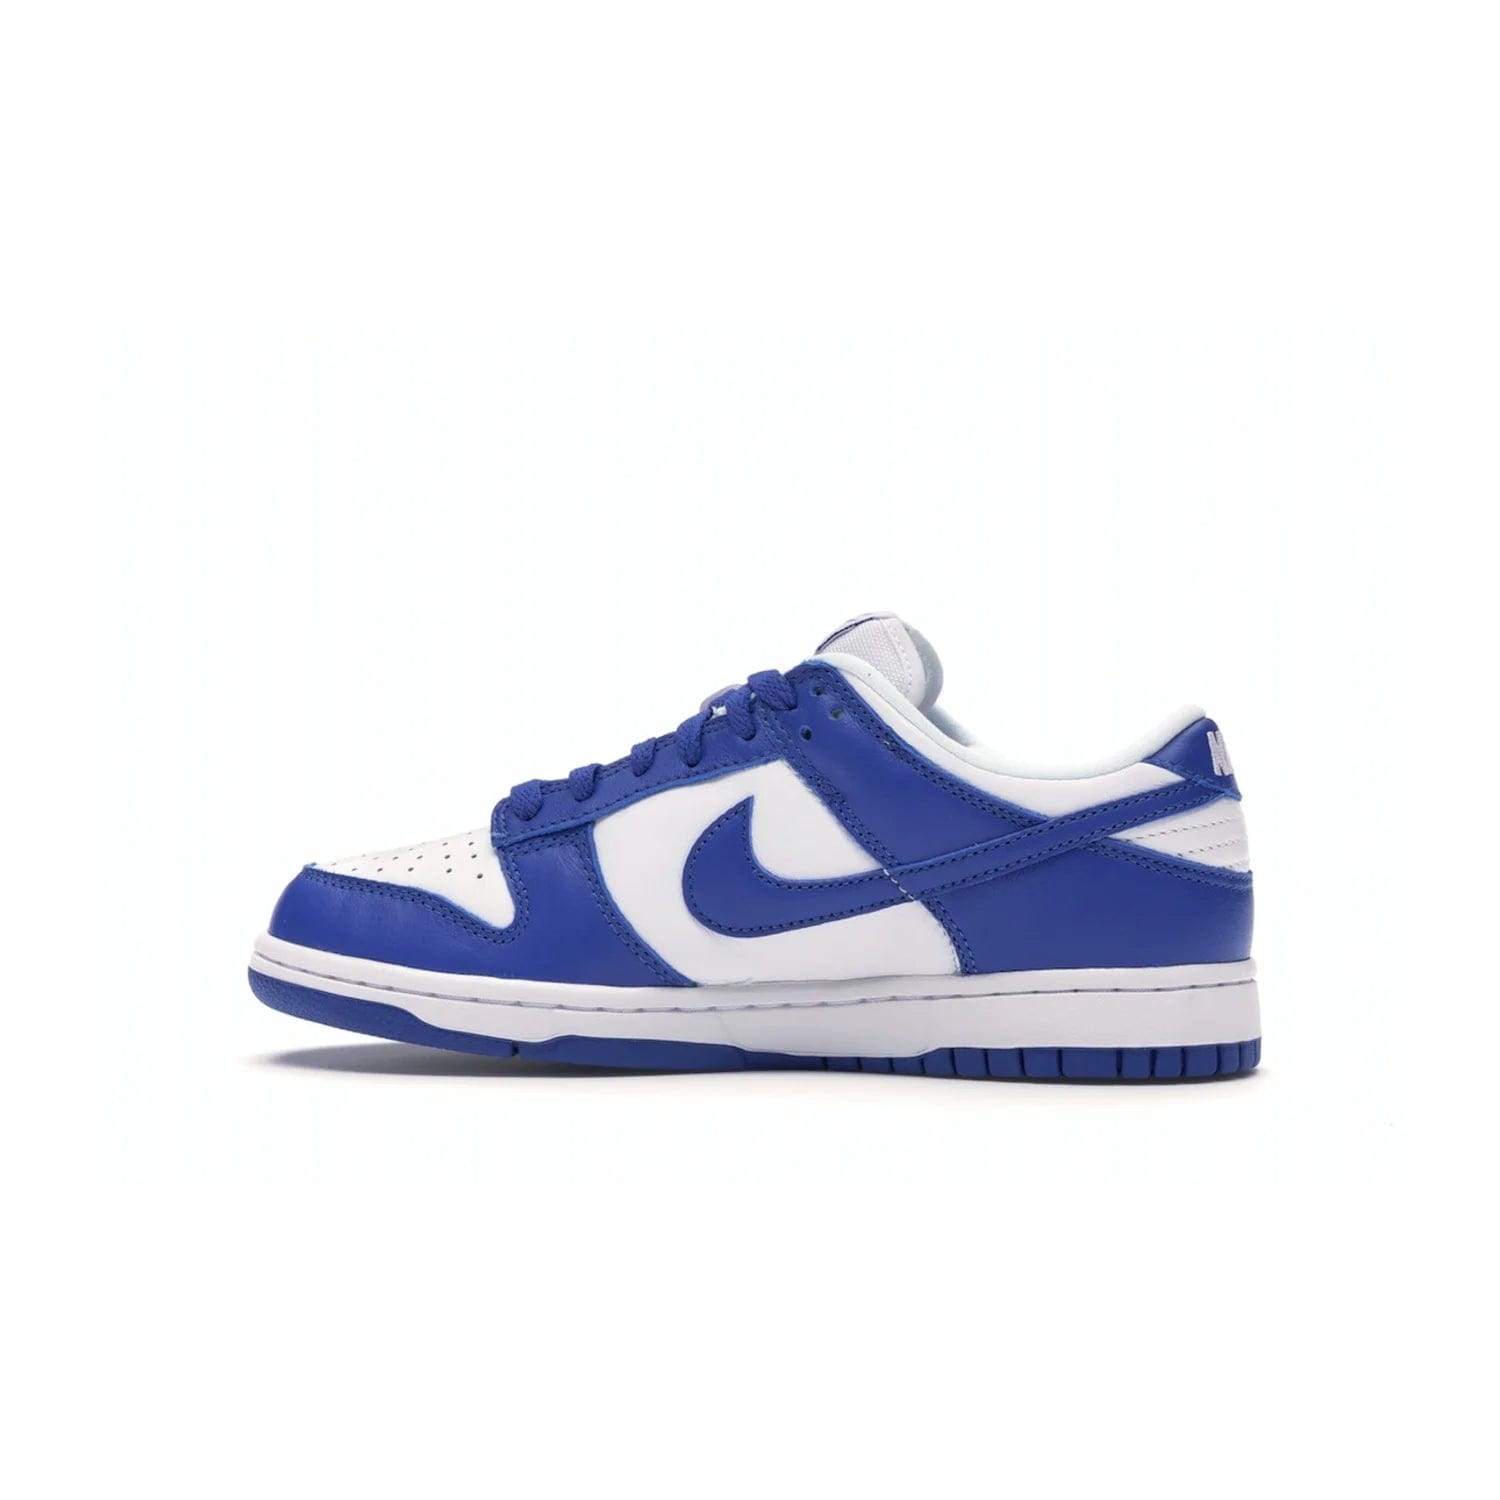 Nike Dunk Low SP Kentucky (2020/2022) - Image 20 - Only at www.BallersClubKickz.com - Classic Nike Dunk Low SP Kentucky with timeless White/Varsity Royal colorway. White leather upper, royal outsole, and Nike branding. A hit since March 2020 homage to the 1985 Nike College Colors program. Show your support with these classic kicks.